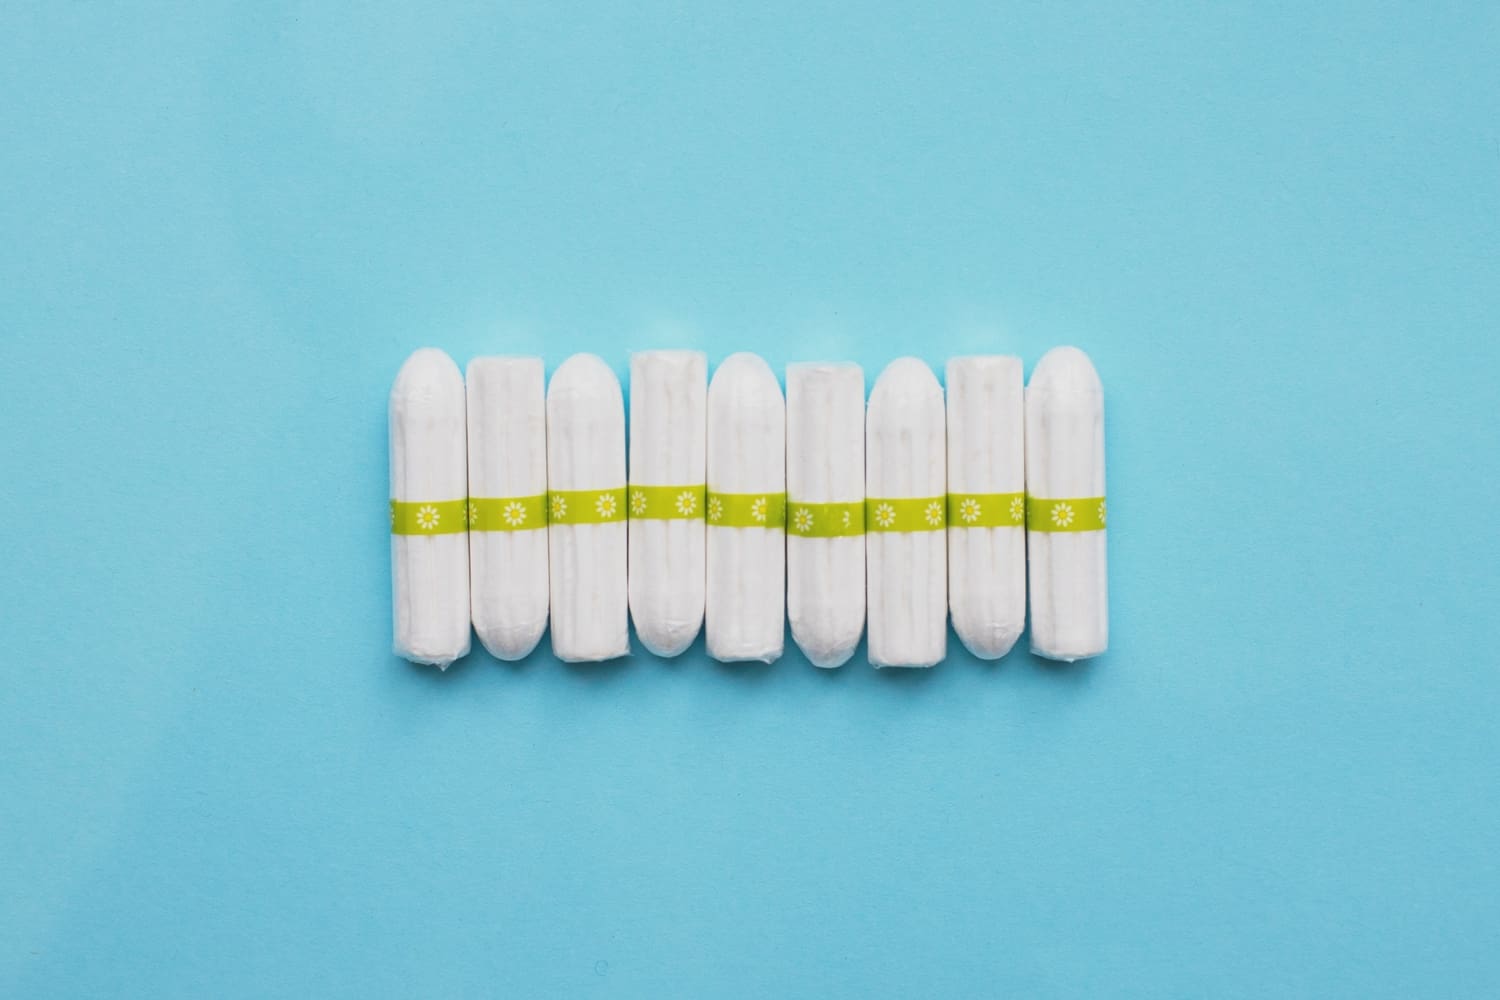 nine tampons against a blue background